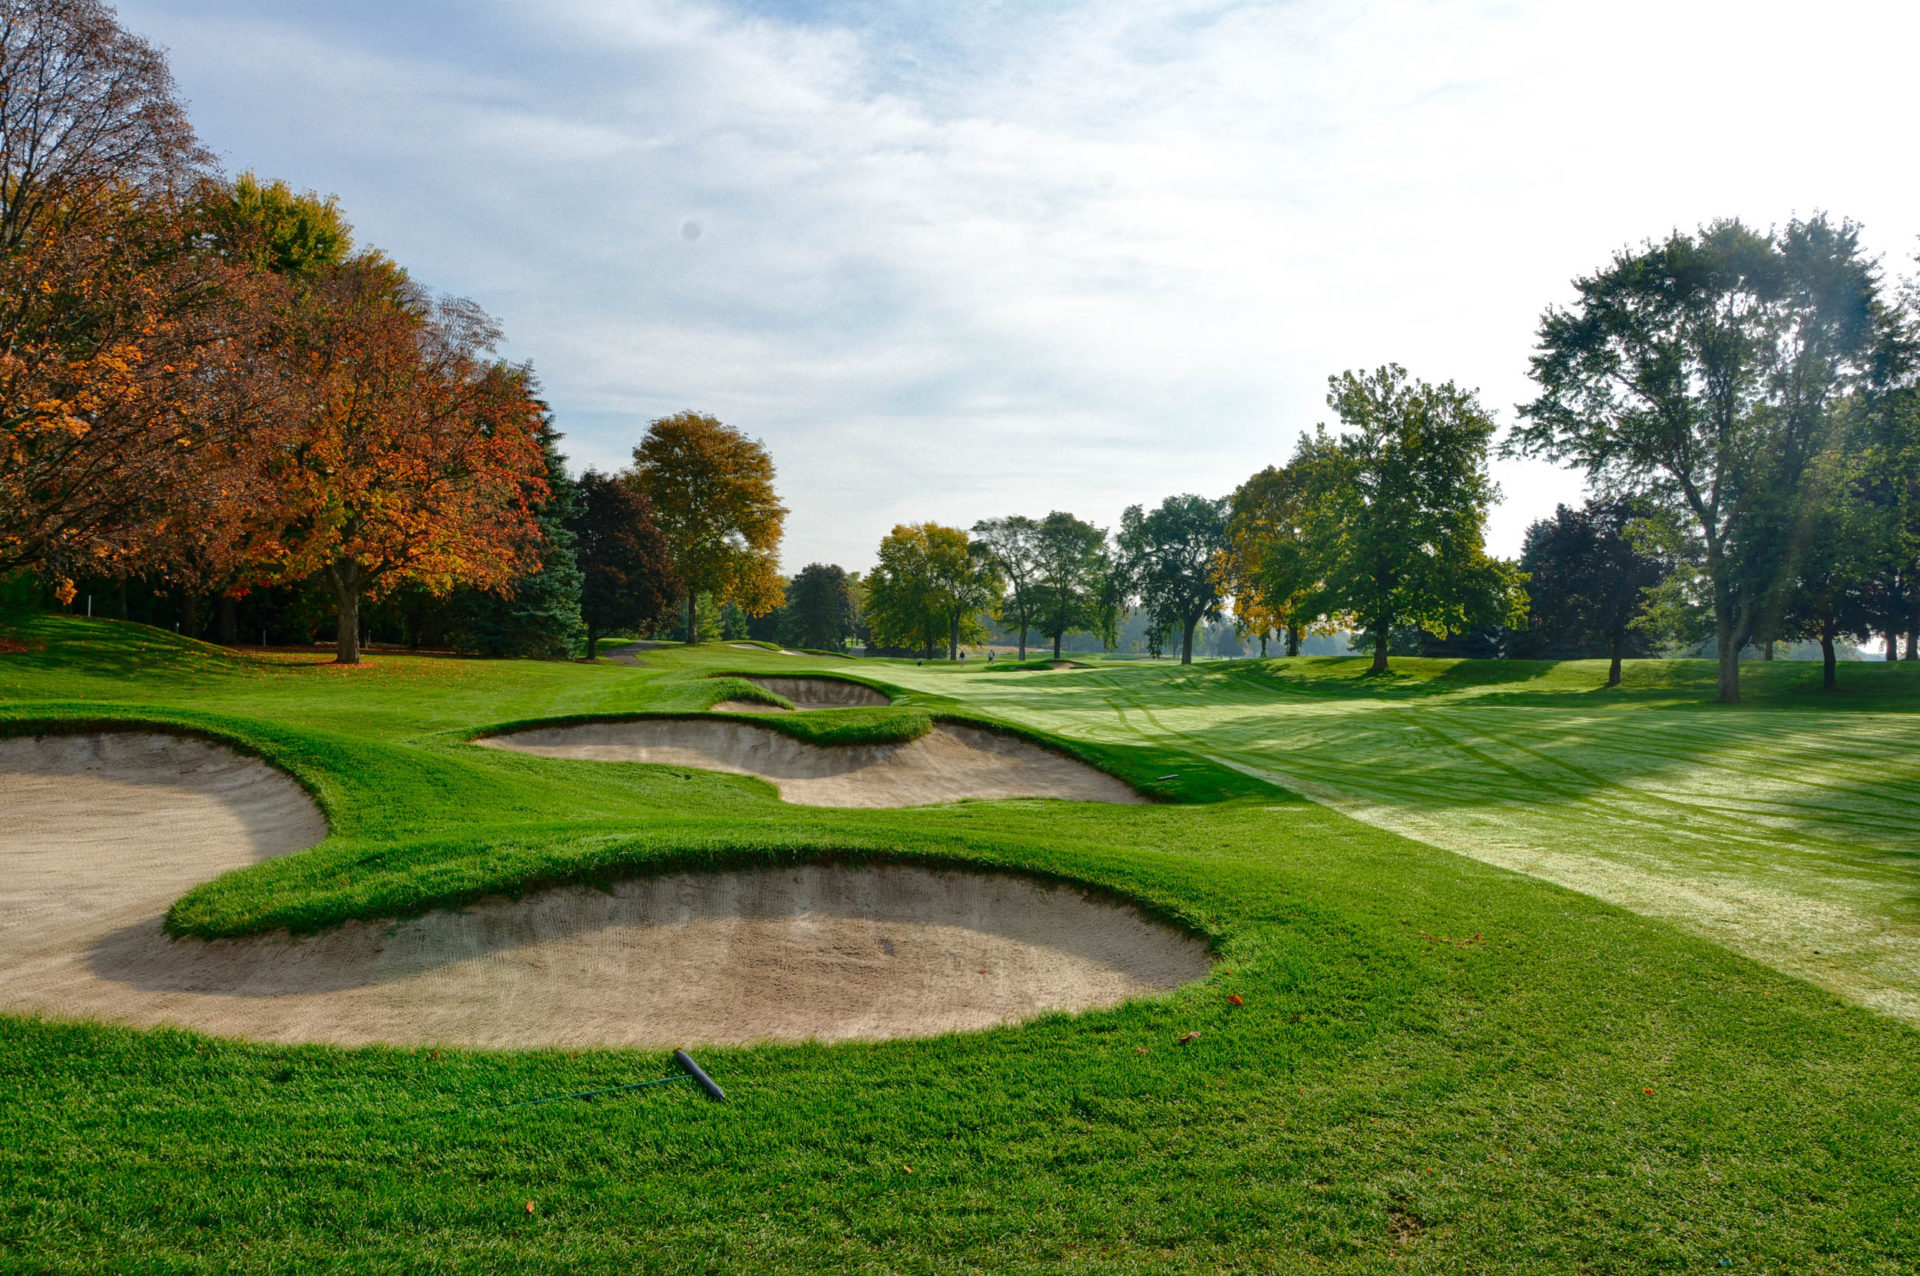 Oakland Hills Country Club is one of the Top 100 Golf Courses 